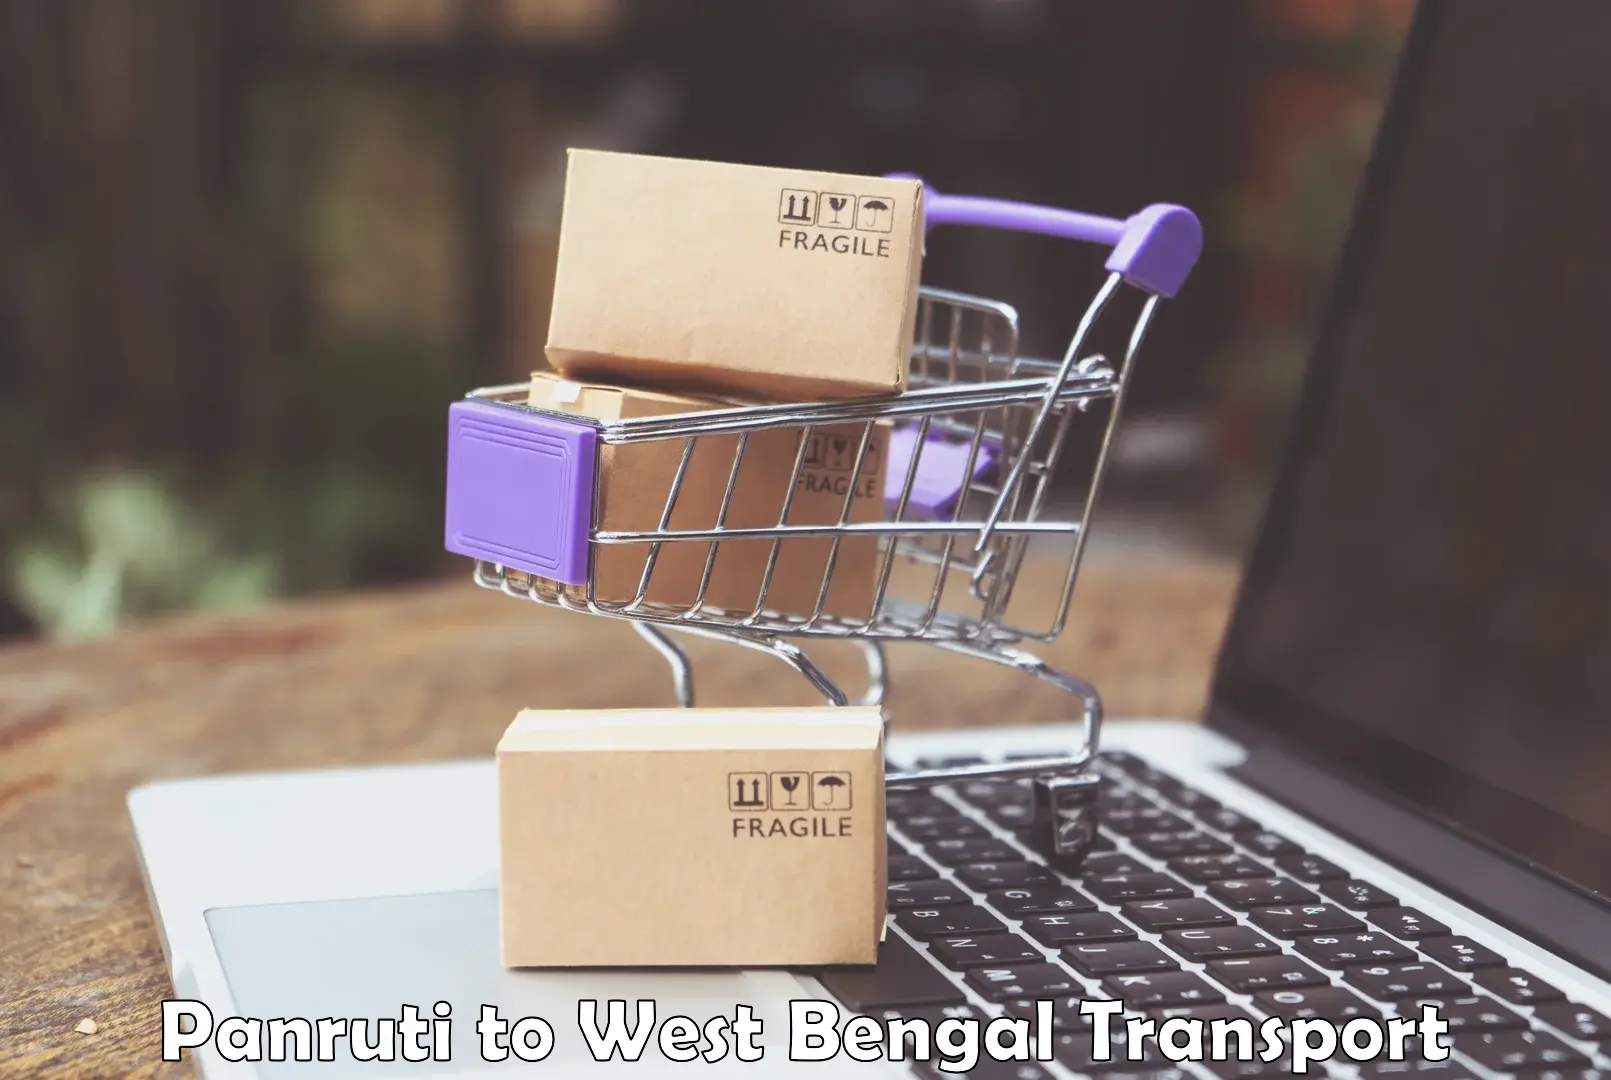 Domestic transport services Panruti to West Bengal